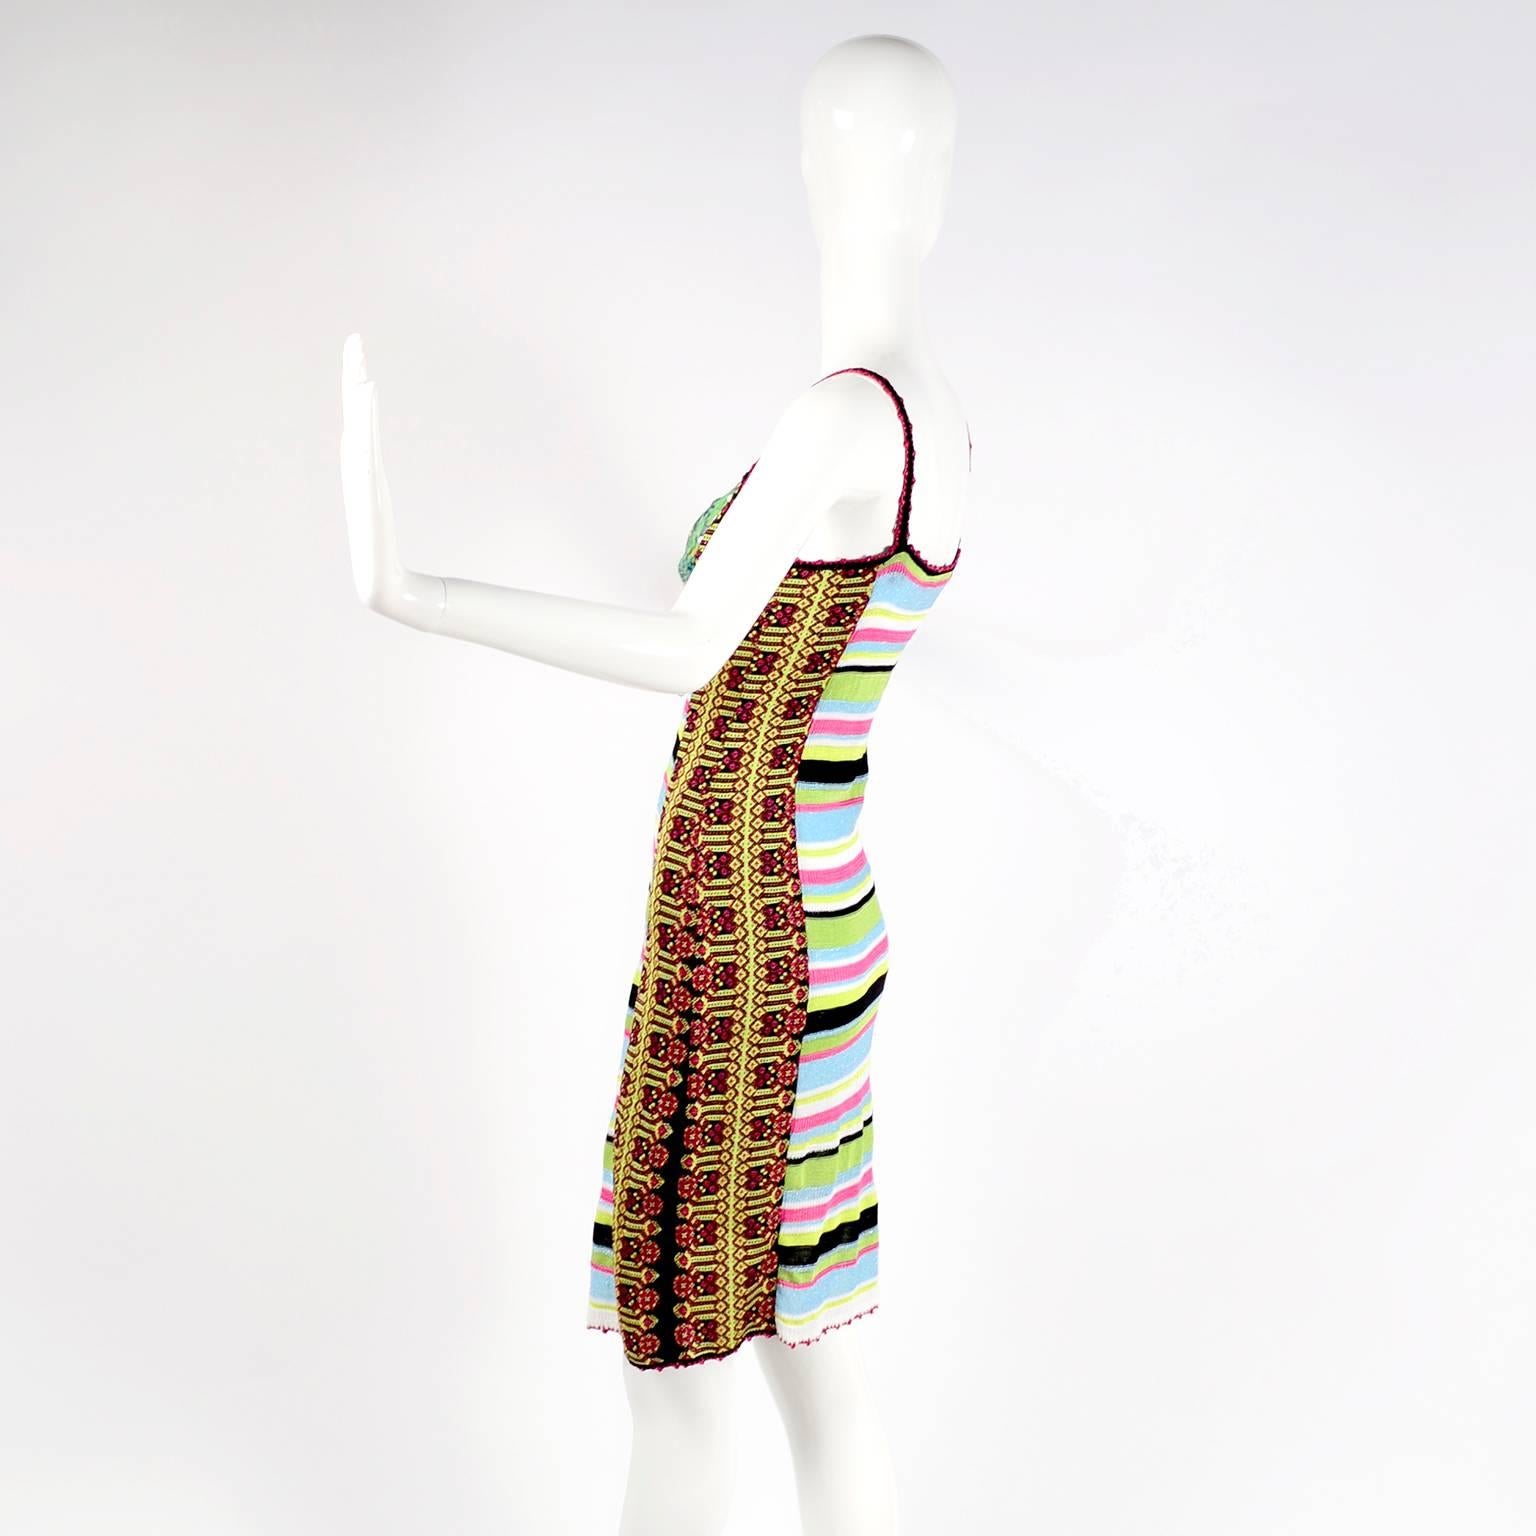 Women's Christian Lacroix Dress in Colorful Stretch Knit With Sequins Size Medium